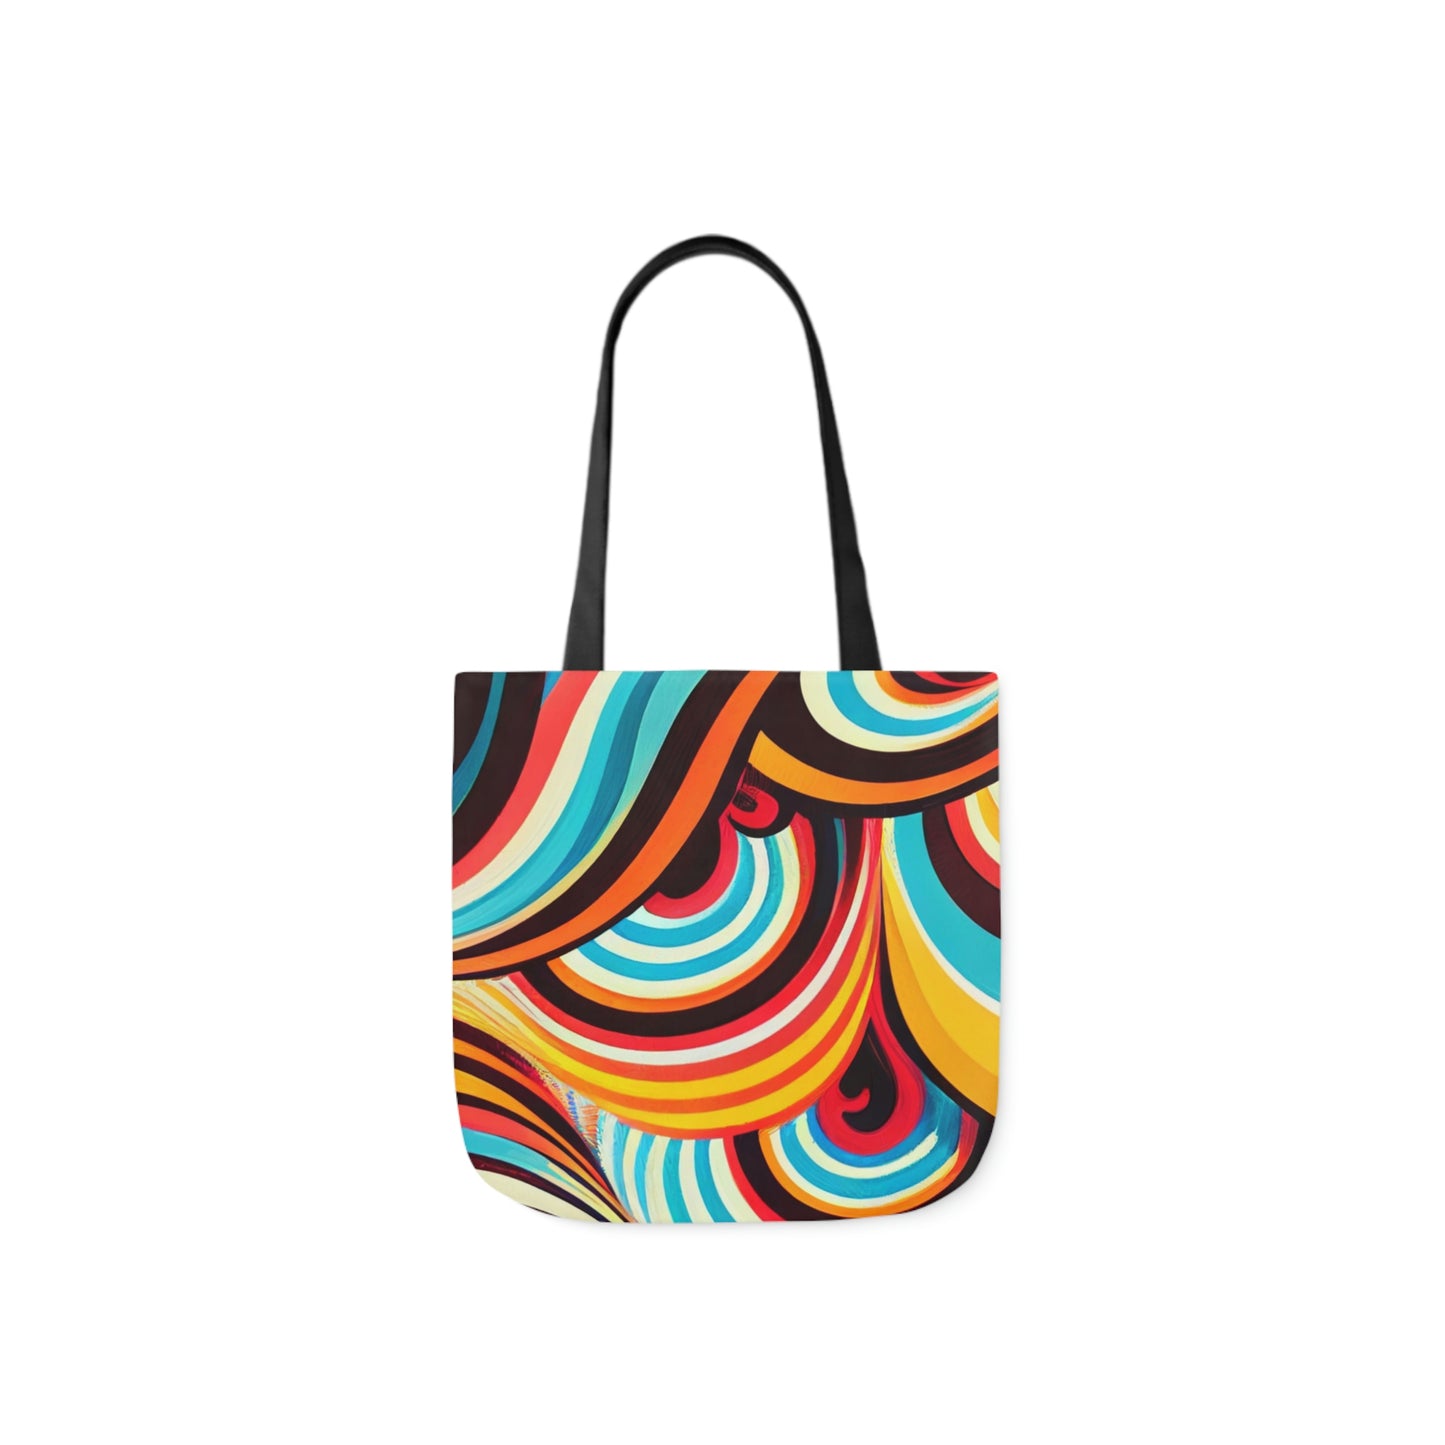 Groovy Canvas Tote Bag